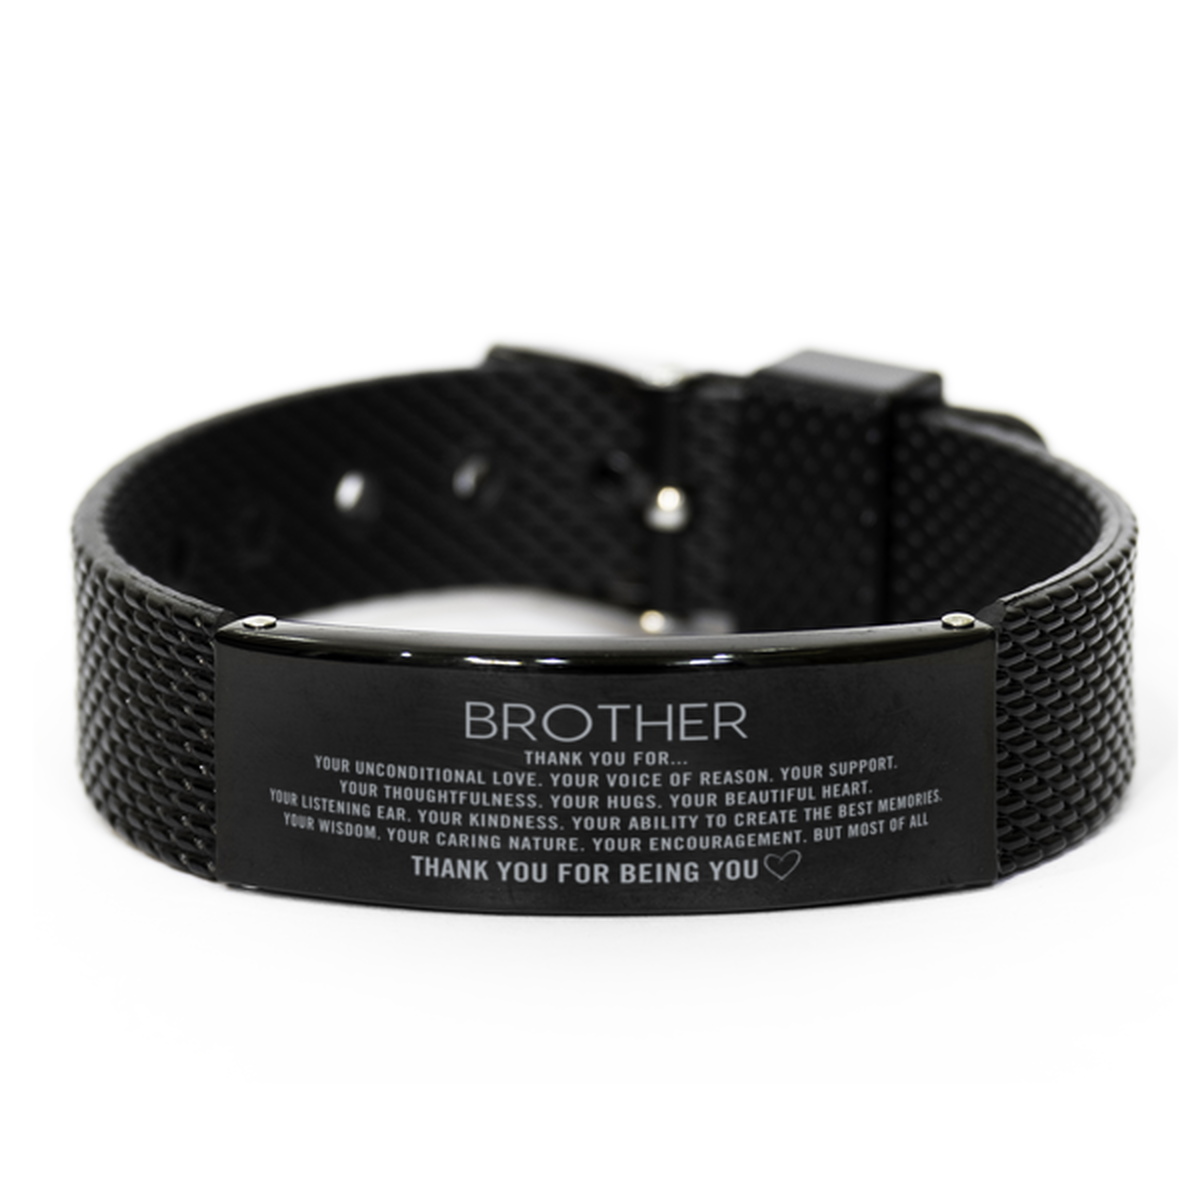 Brother Black Shark Mesh Bracelet Custom, Engraved Gifts For Brother Christmas Graduation Birthday Gifts for Men Women Brother Thank you for Your unconditional love